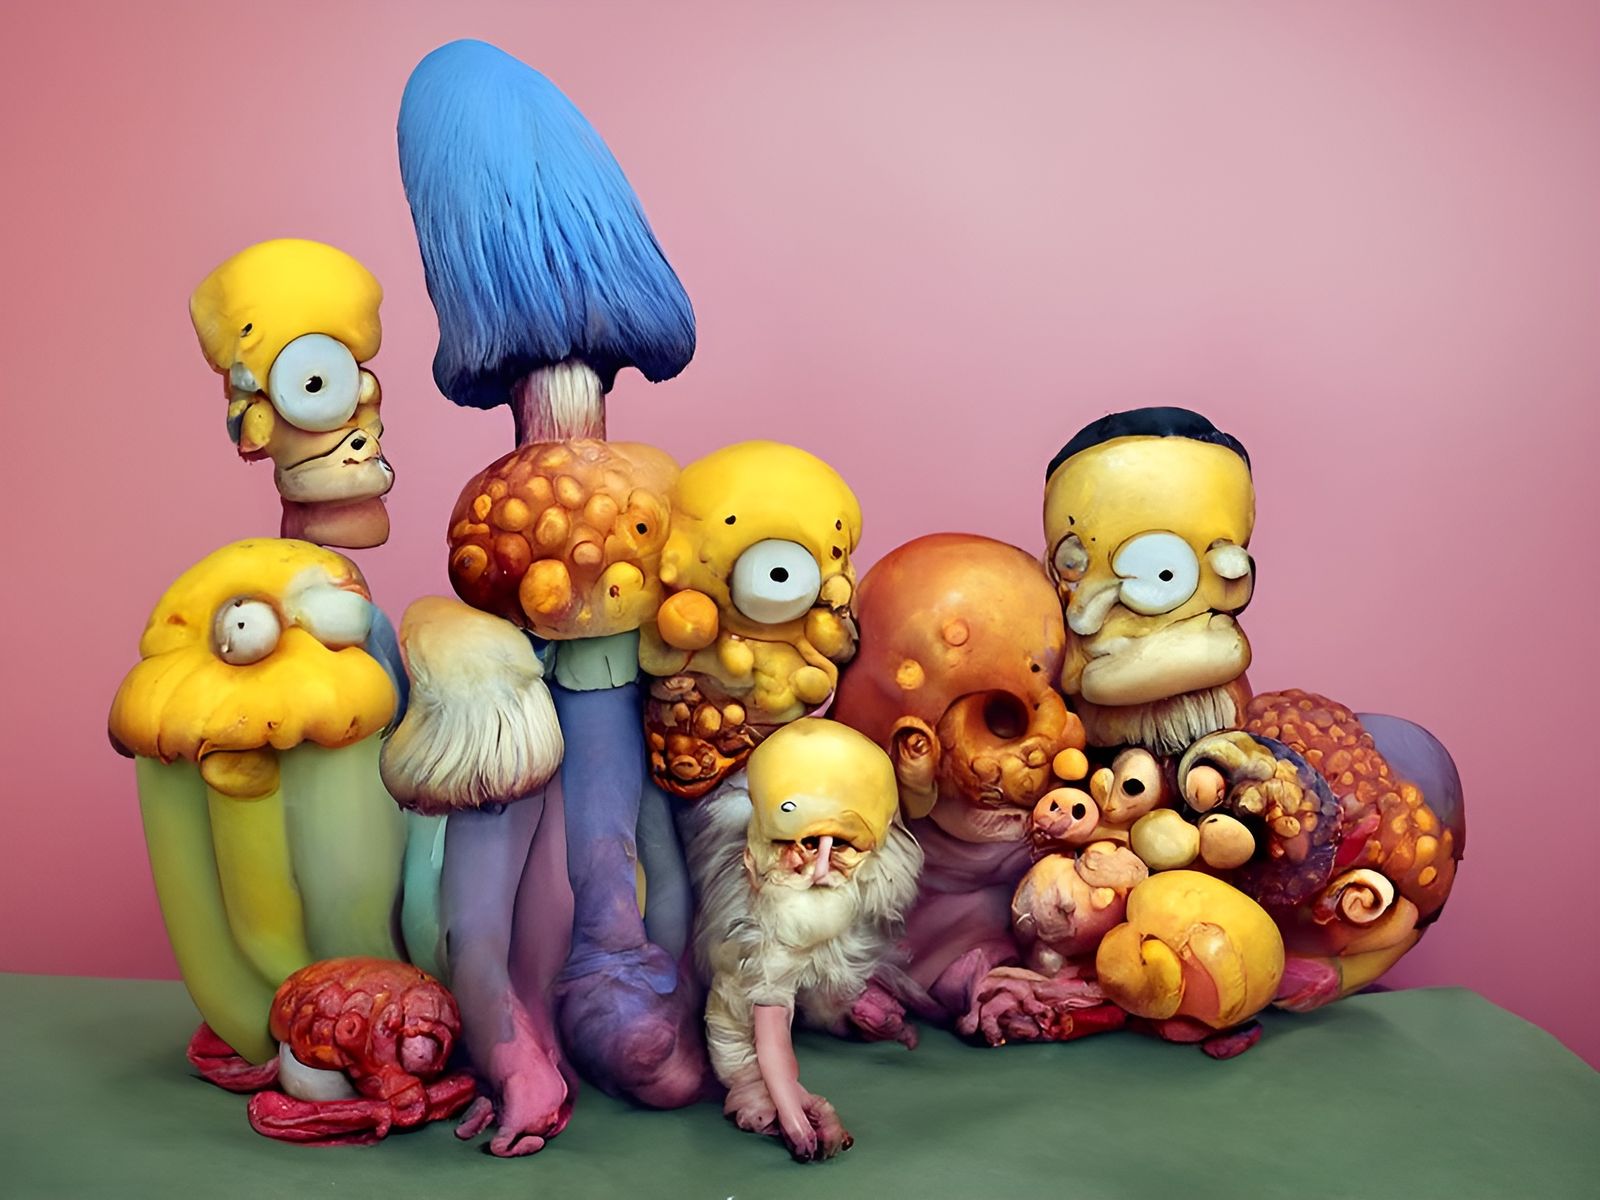 The Shroomsons